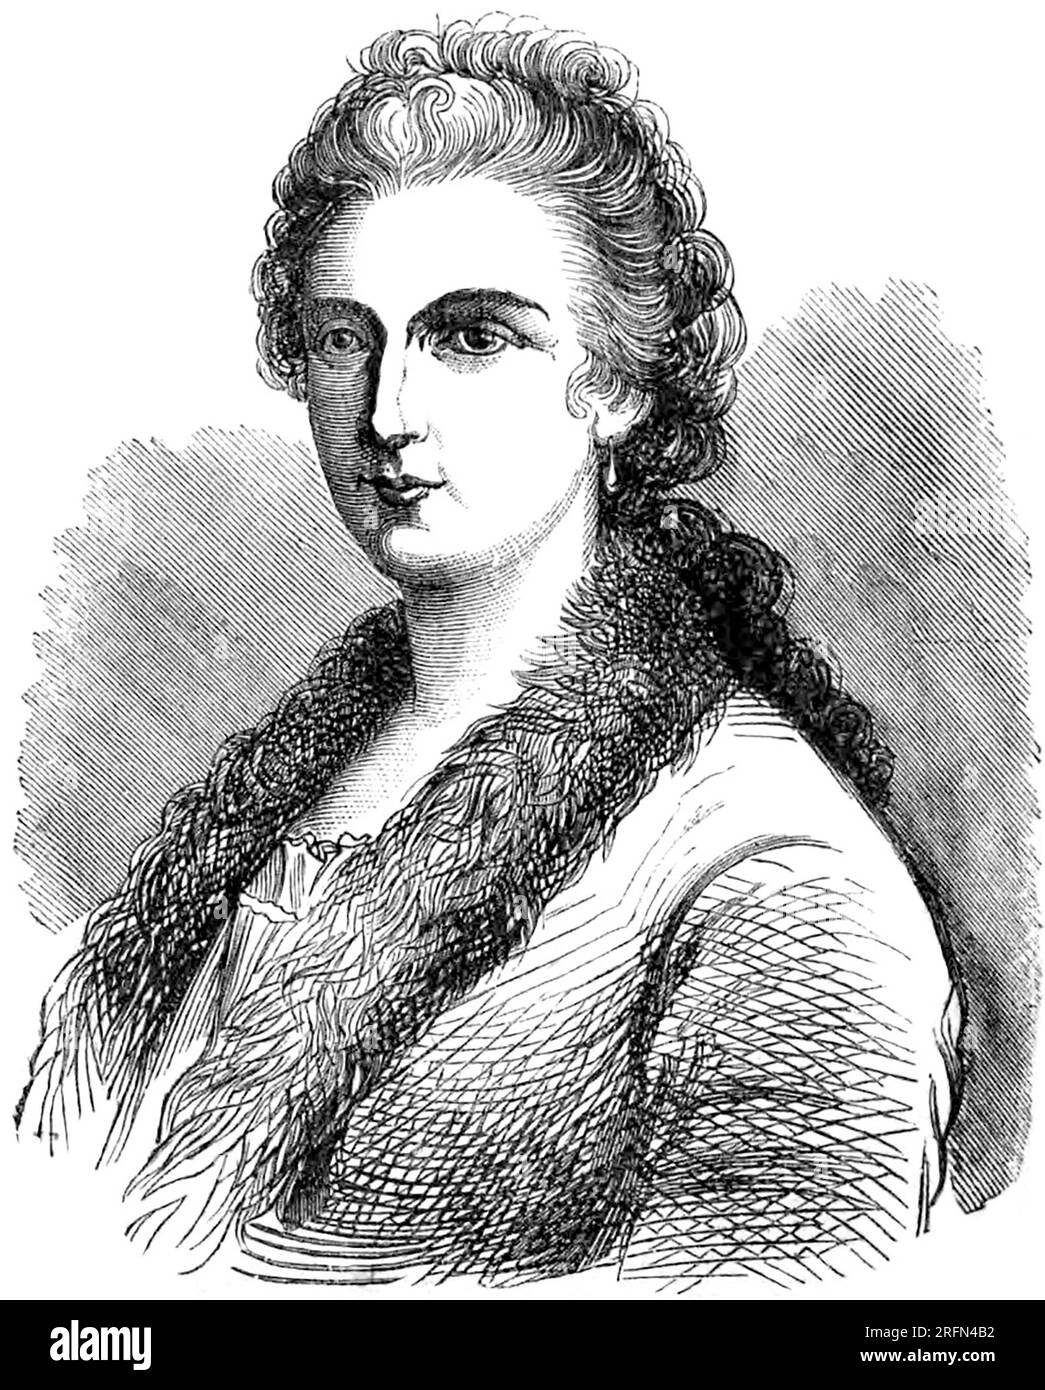 Portrait of Maria Gaetana Agnesi (1718-1799), Italian mathematician and philosopher, who was the first woman to write a mathematics handbook and the first female math professor at a university. She is known for her work in differential calculus and on the cubic curve known as the "witch of Agnesi." Eugenio Camerini, circa mid-19th century. Stock Photo